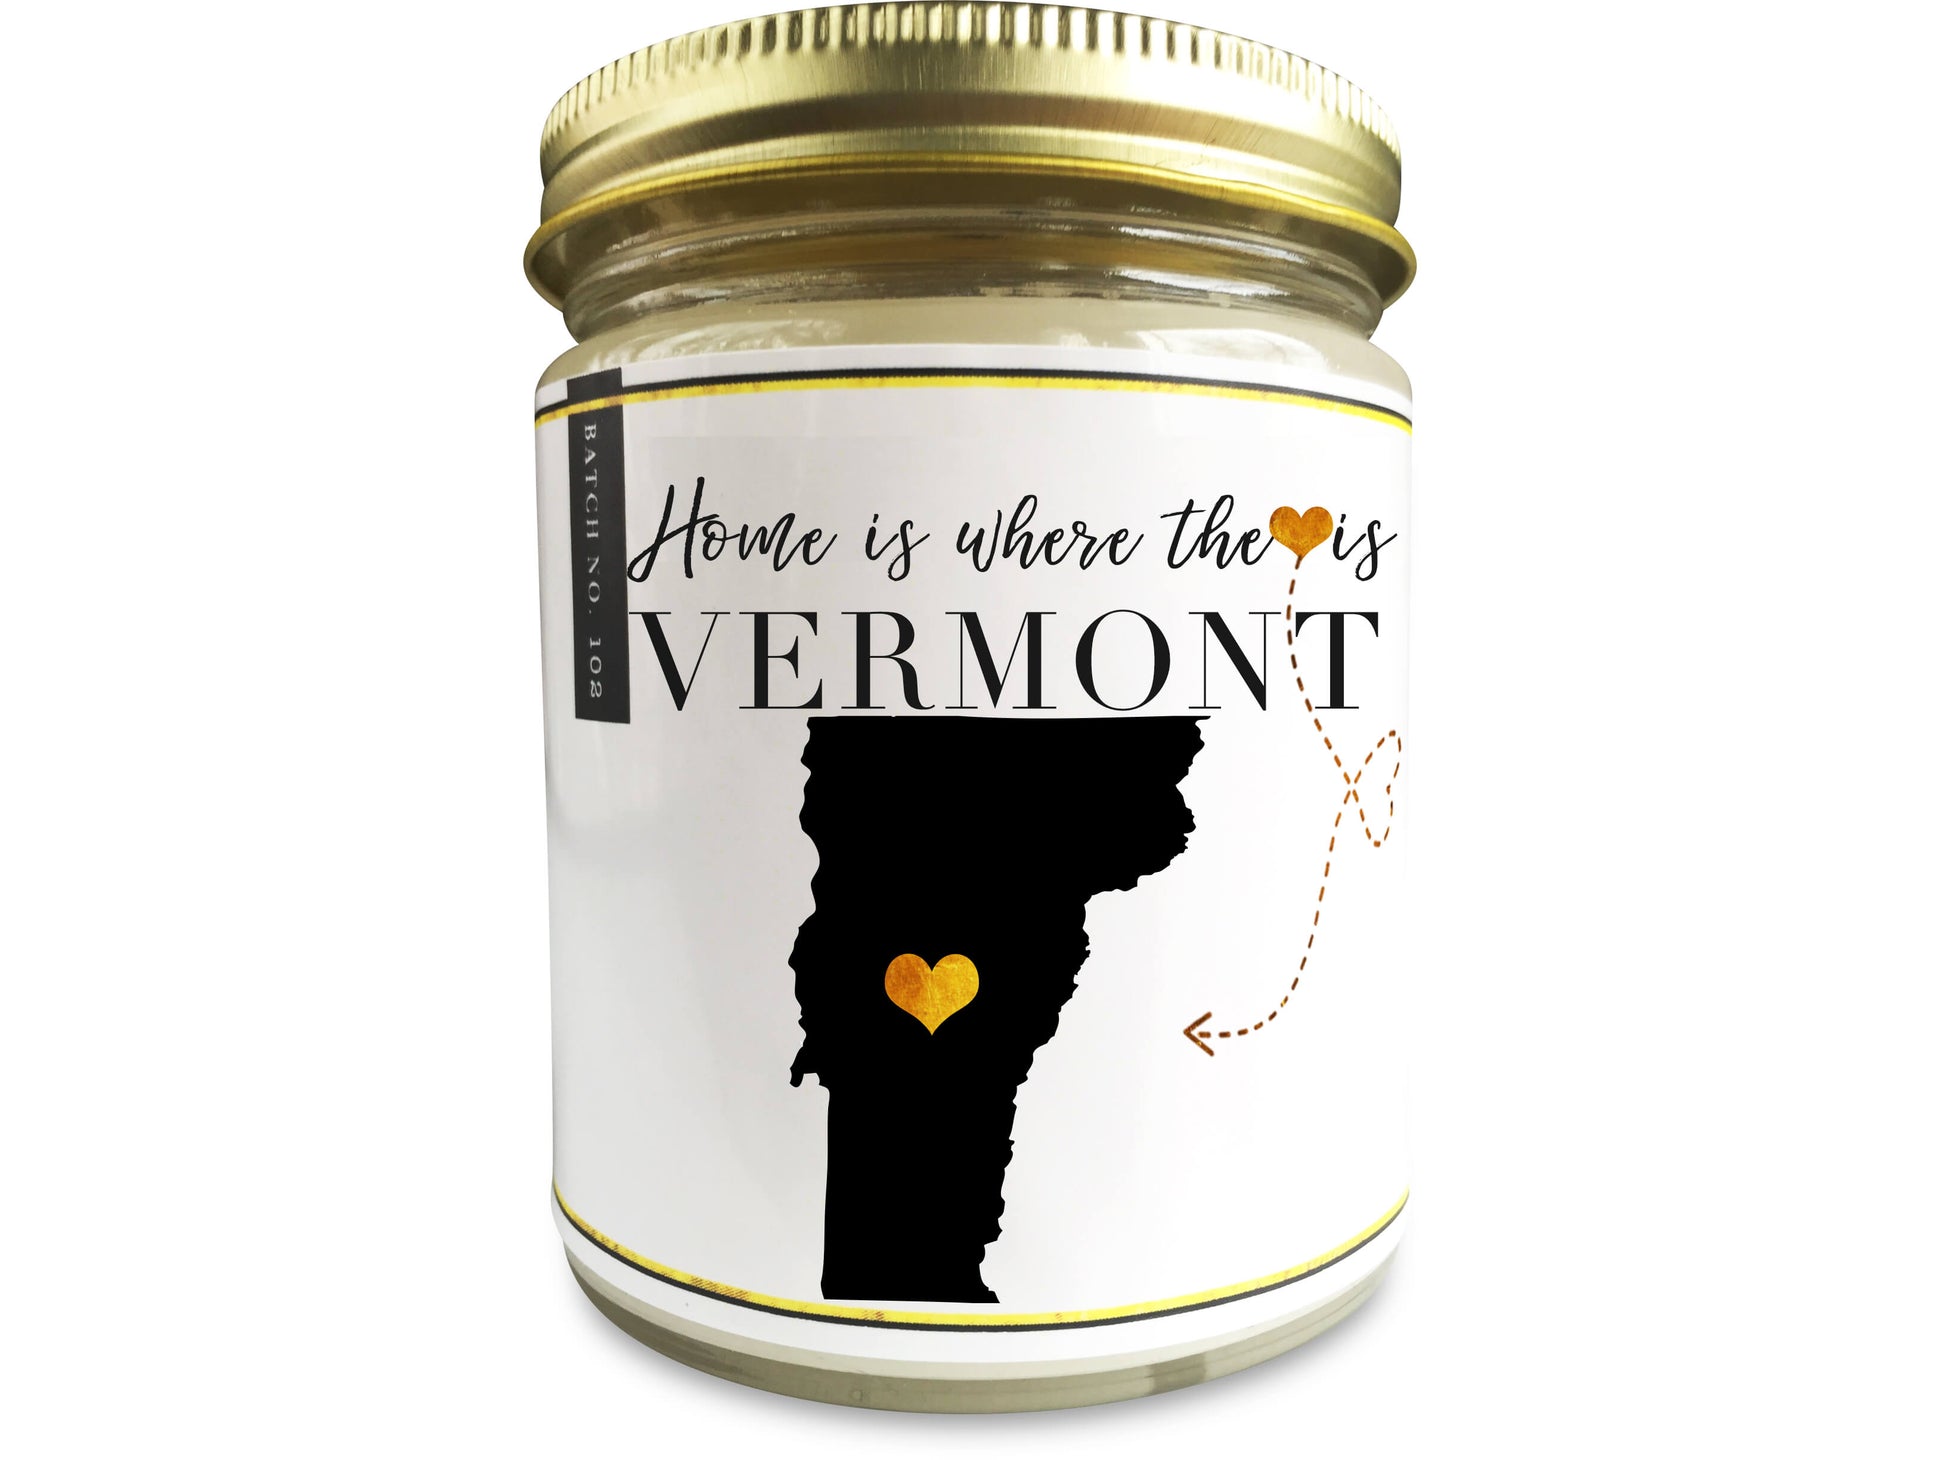 VERMONT Homesick Candle - PenPal Candle Co ™ - Personalize Candle Greetings